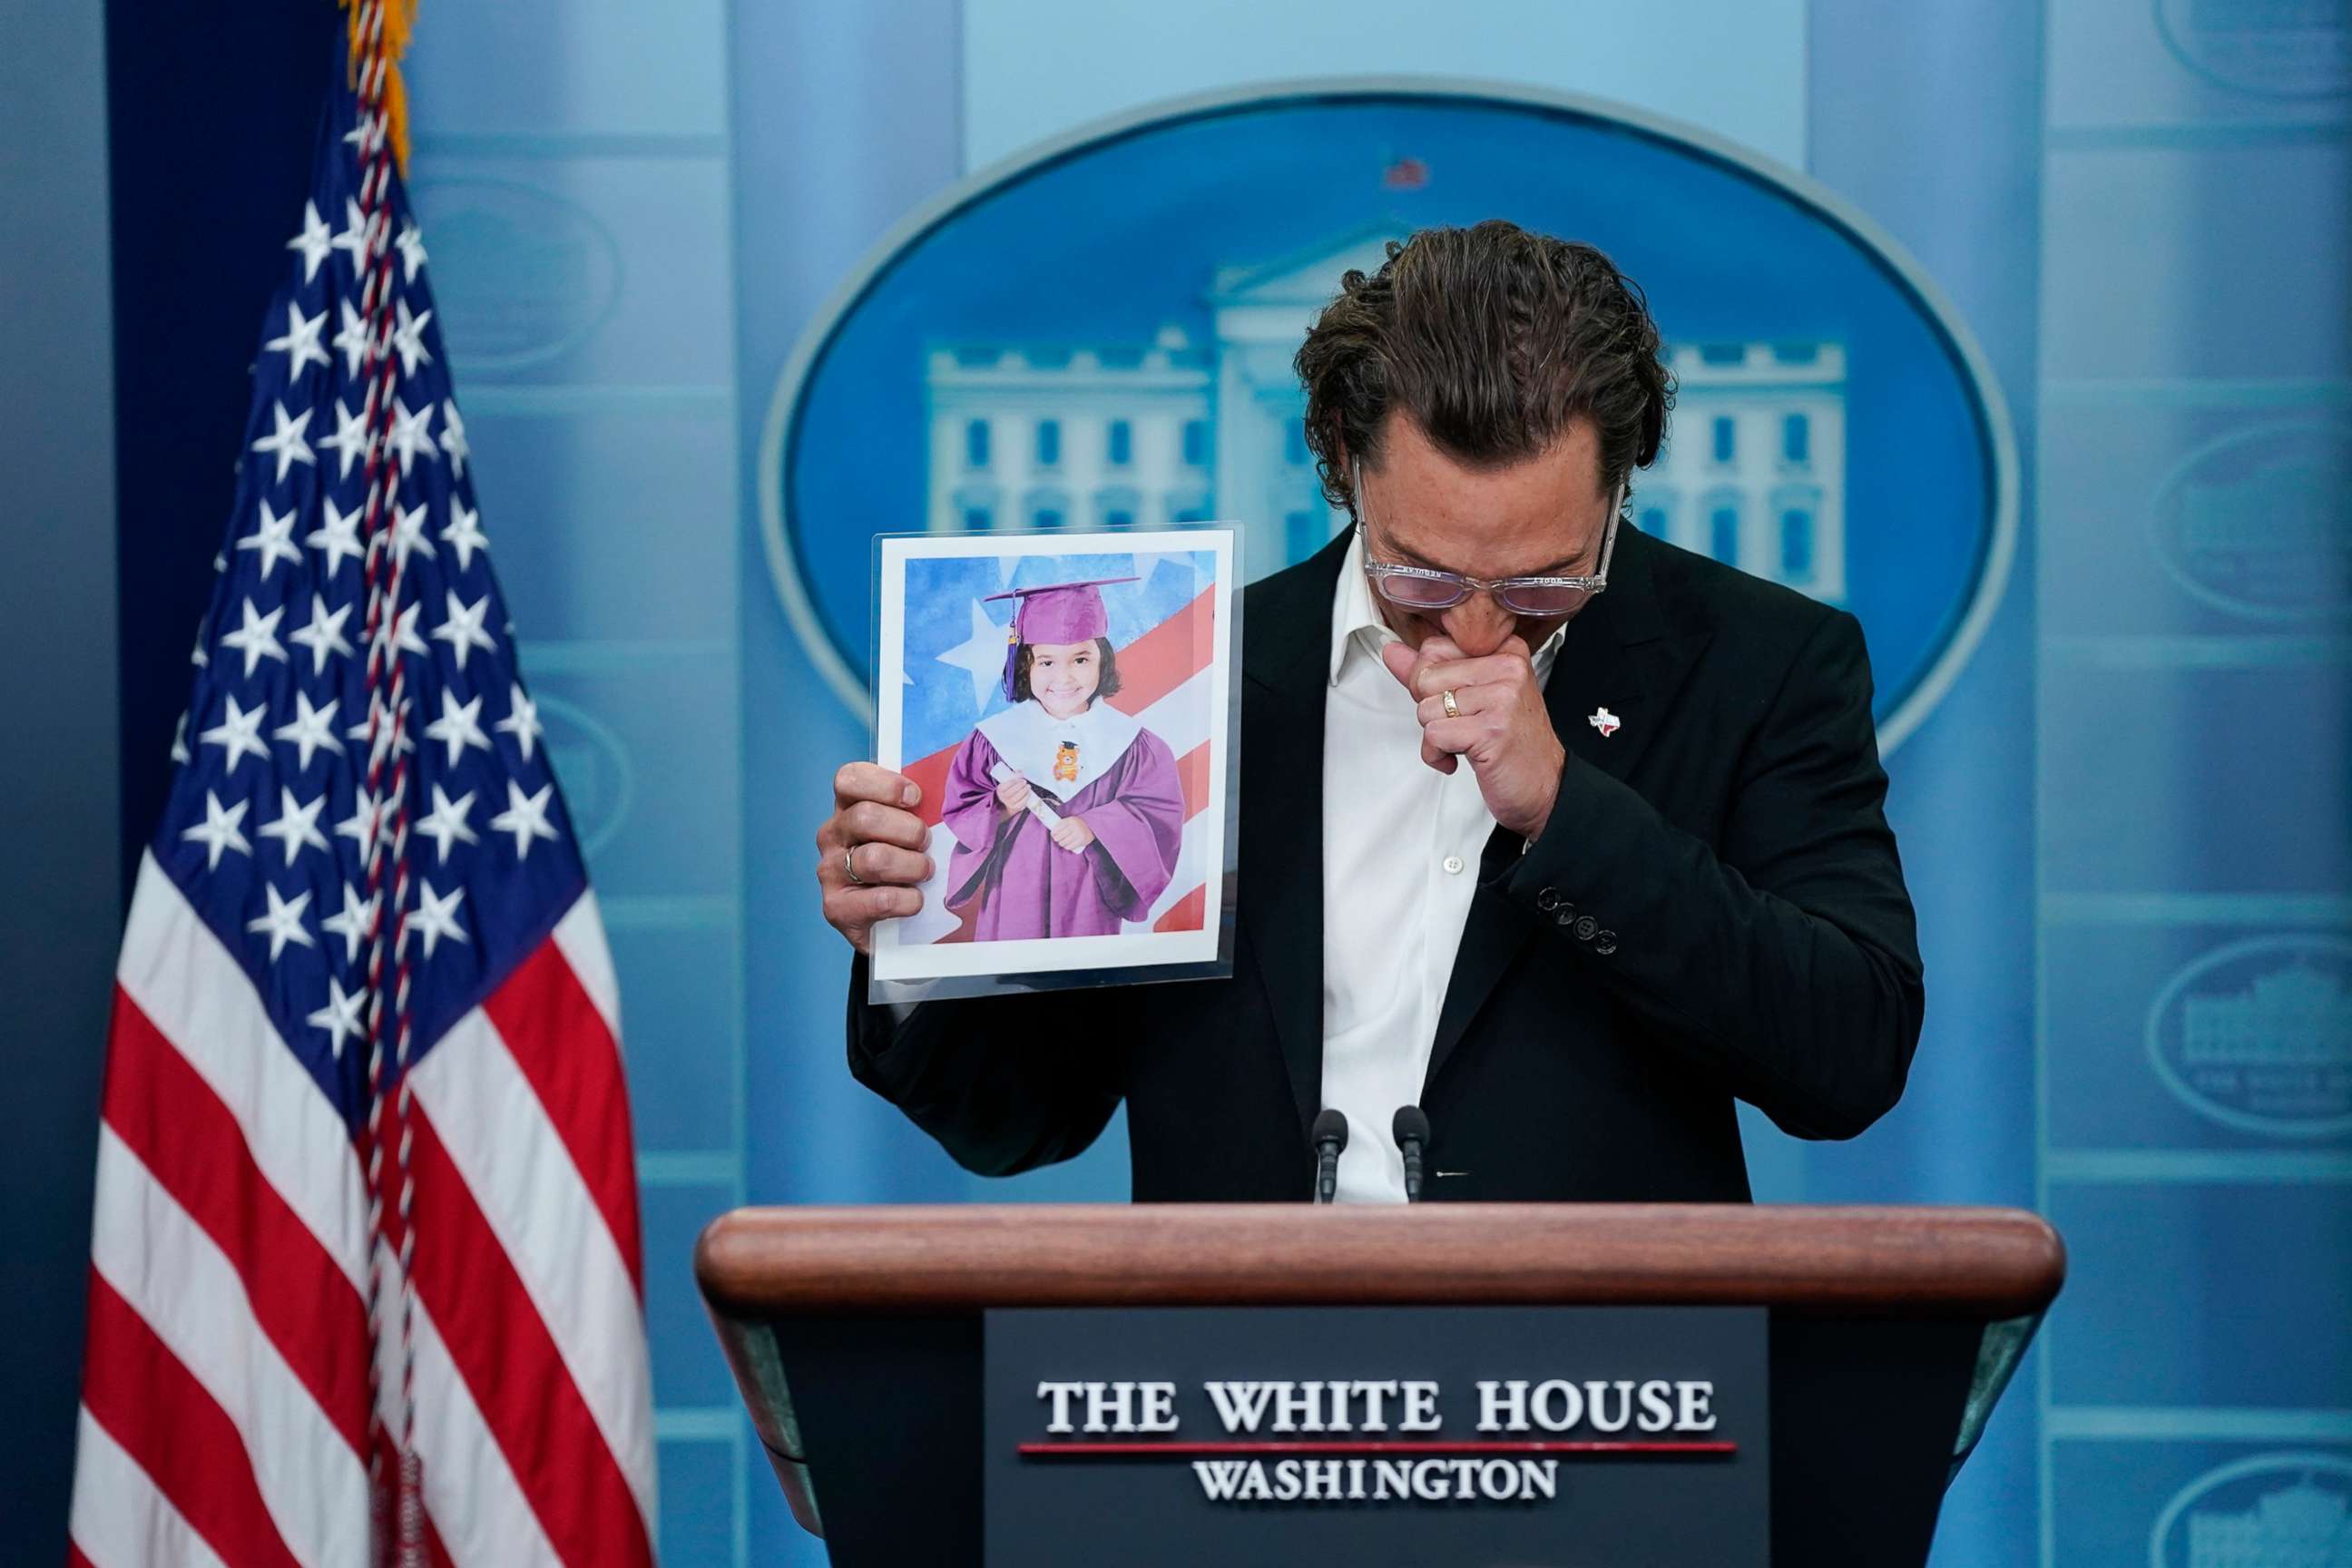 PHOTO: Actor Matthew McConaughey holds an image of Alithia Ramirez, 10, who was killed in the mass shooting at an elementary school in Uvalde, Texas, as he speaks during a press briefing at the White House, June 7, 2022.